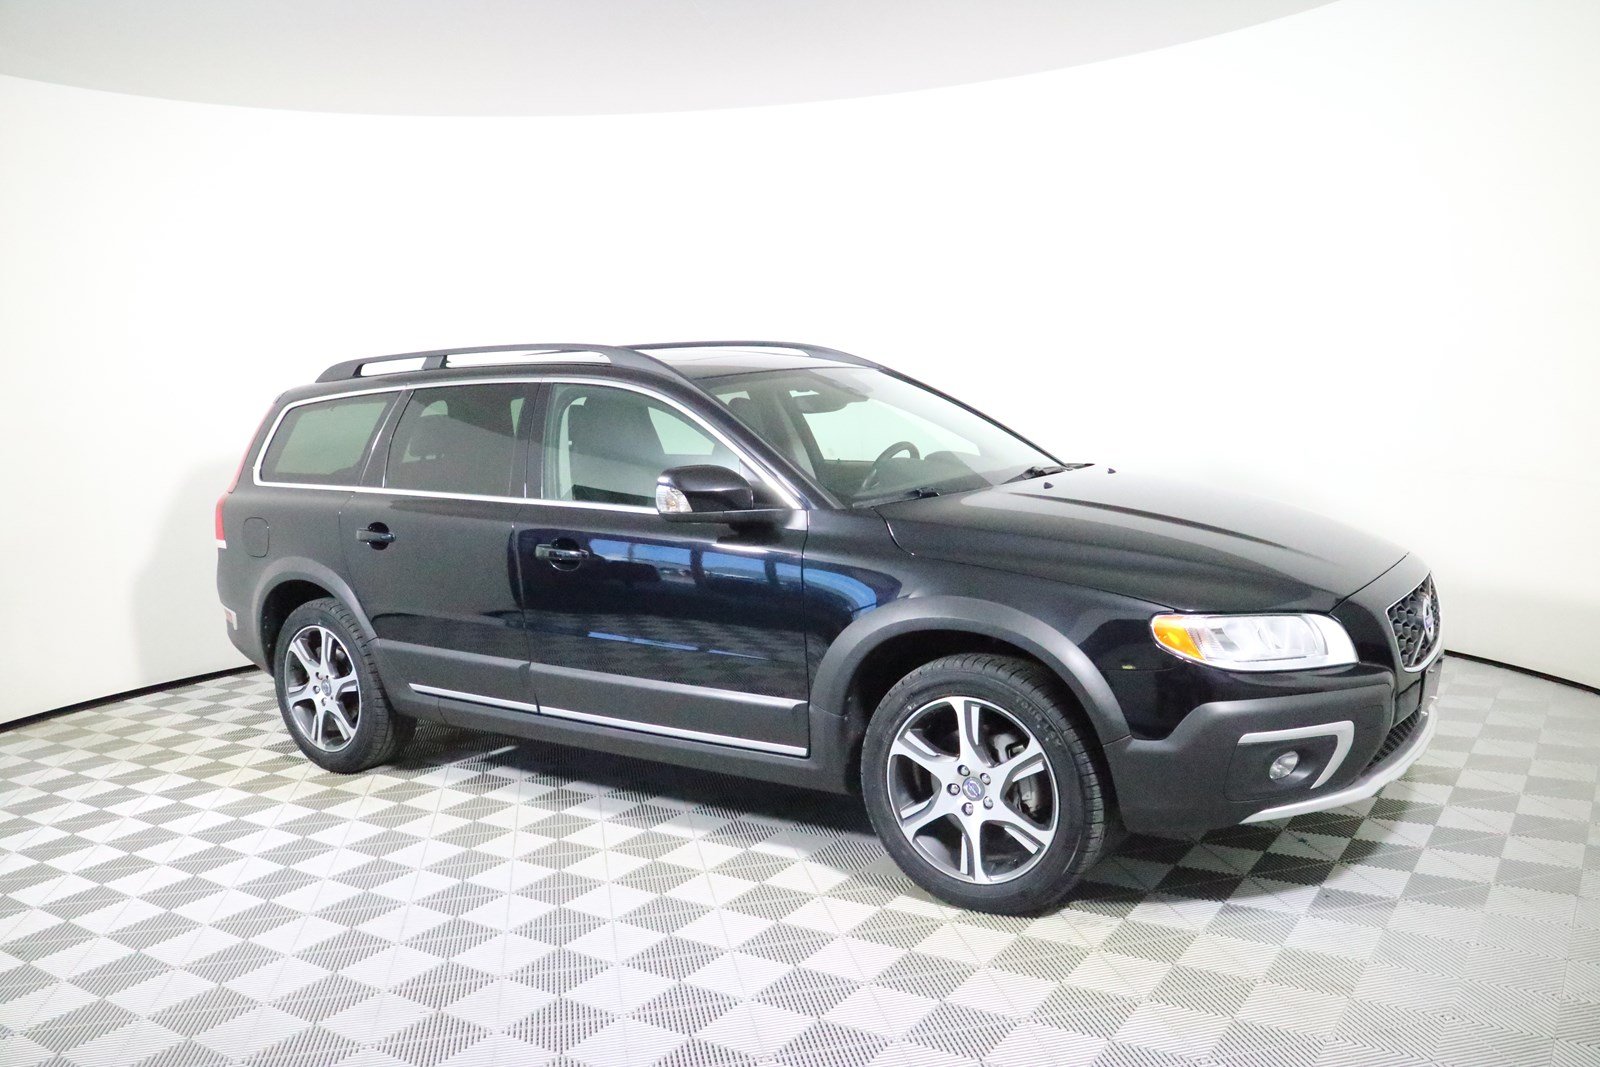 PreOwned 2015 Volvo XC70 T6 Station Wagon in Parkersburg